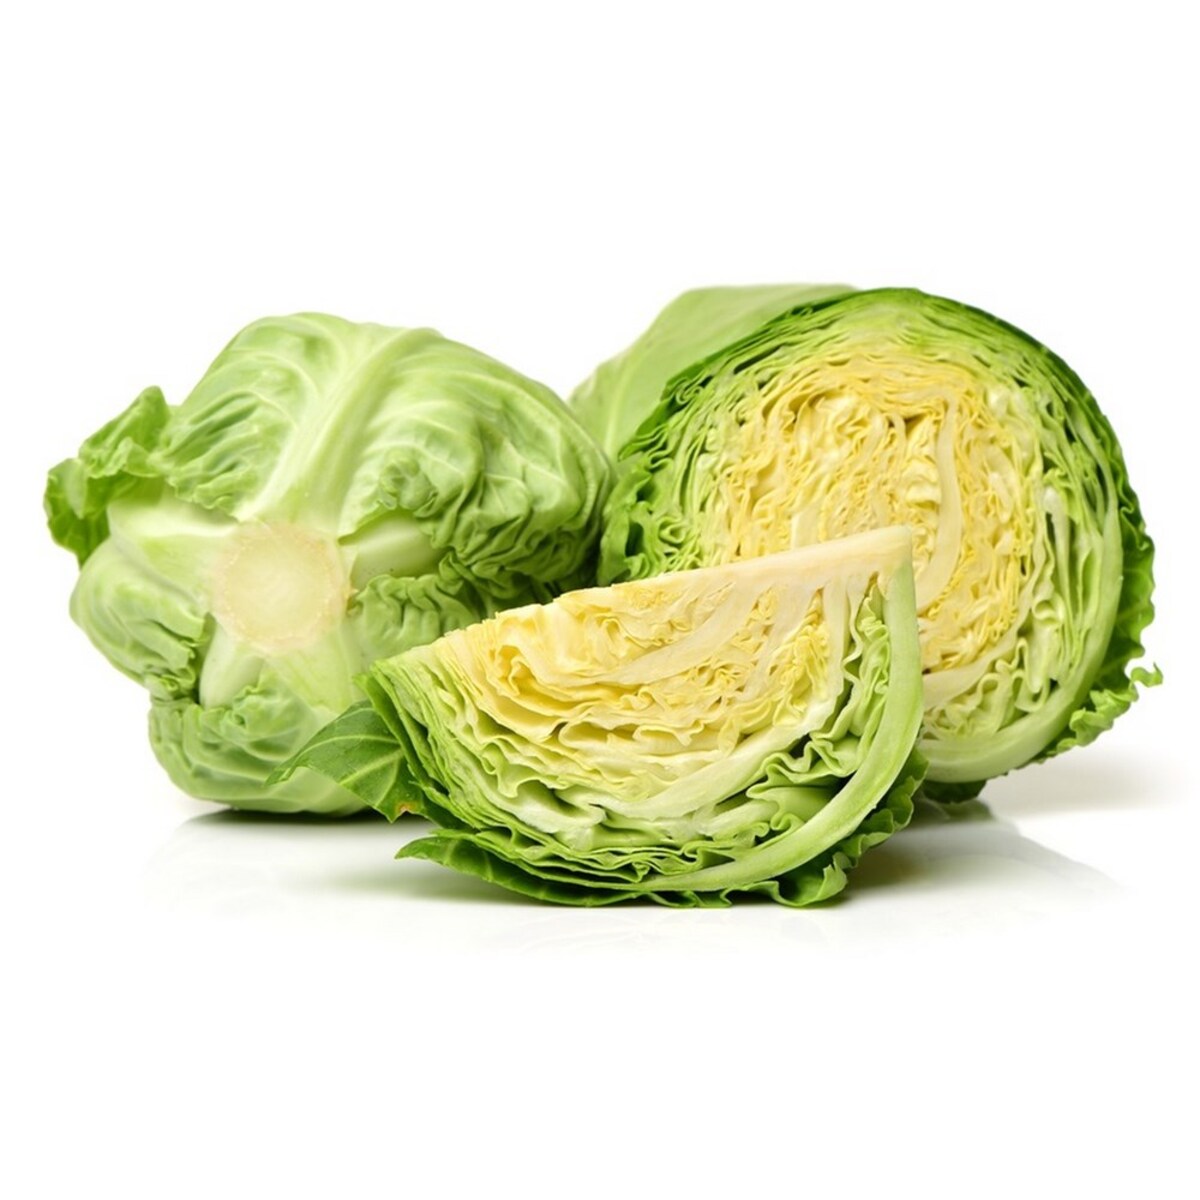 Cabbage Approx. 450gm to 500gm